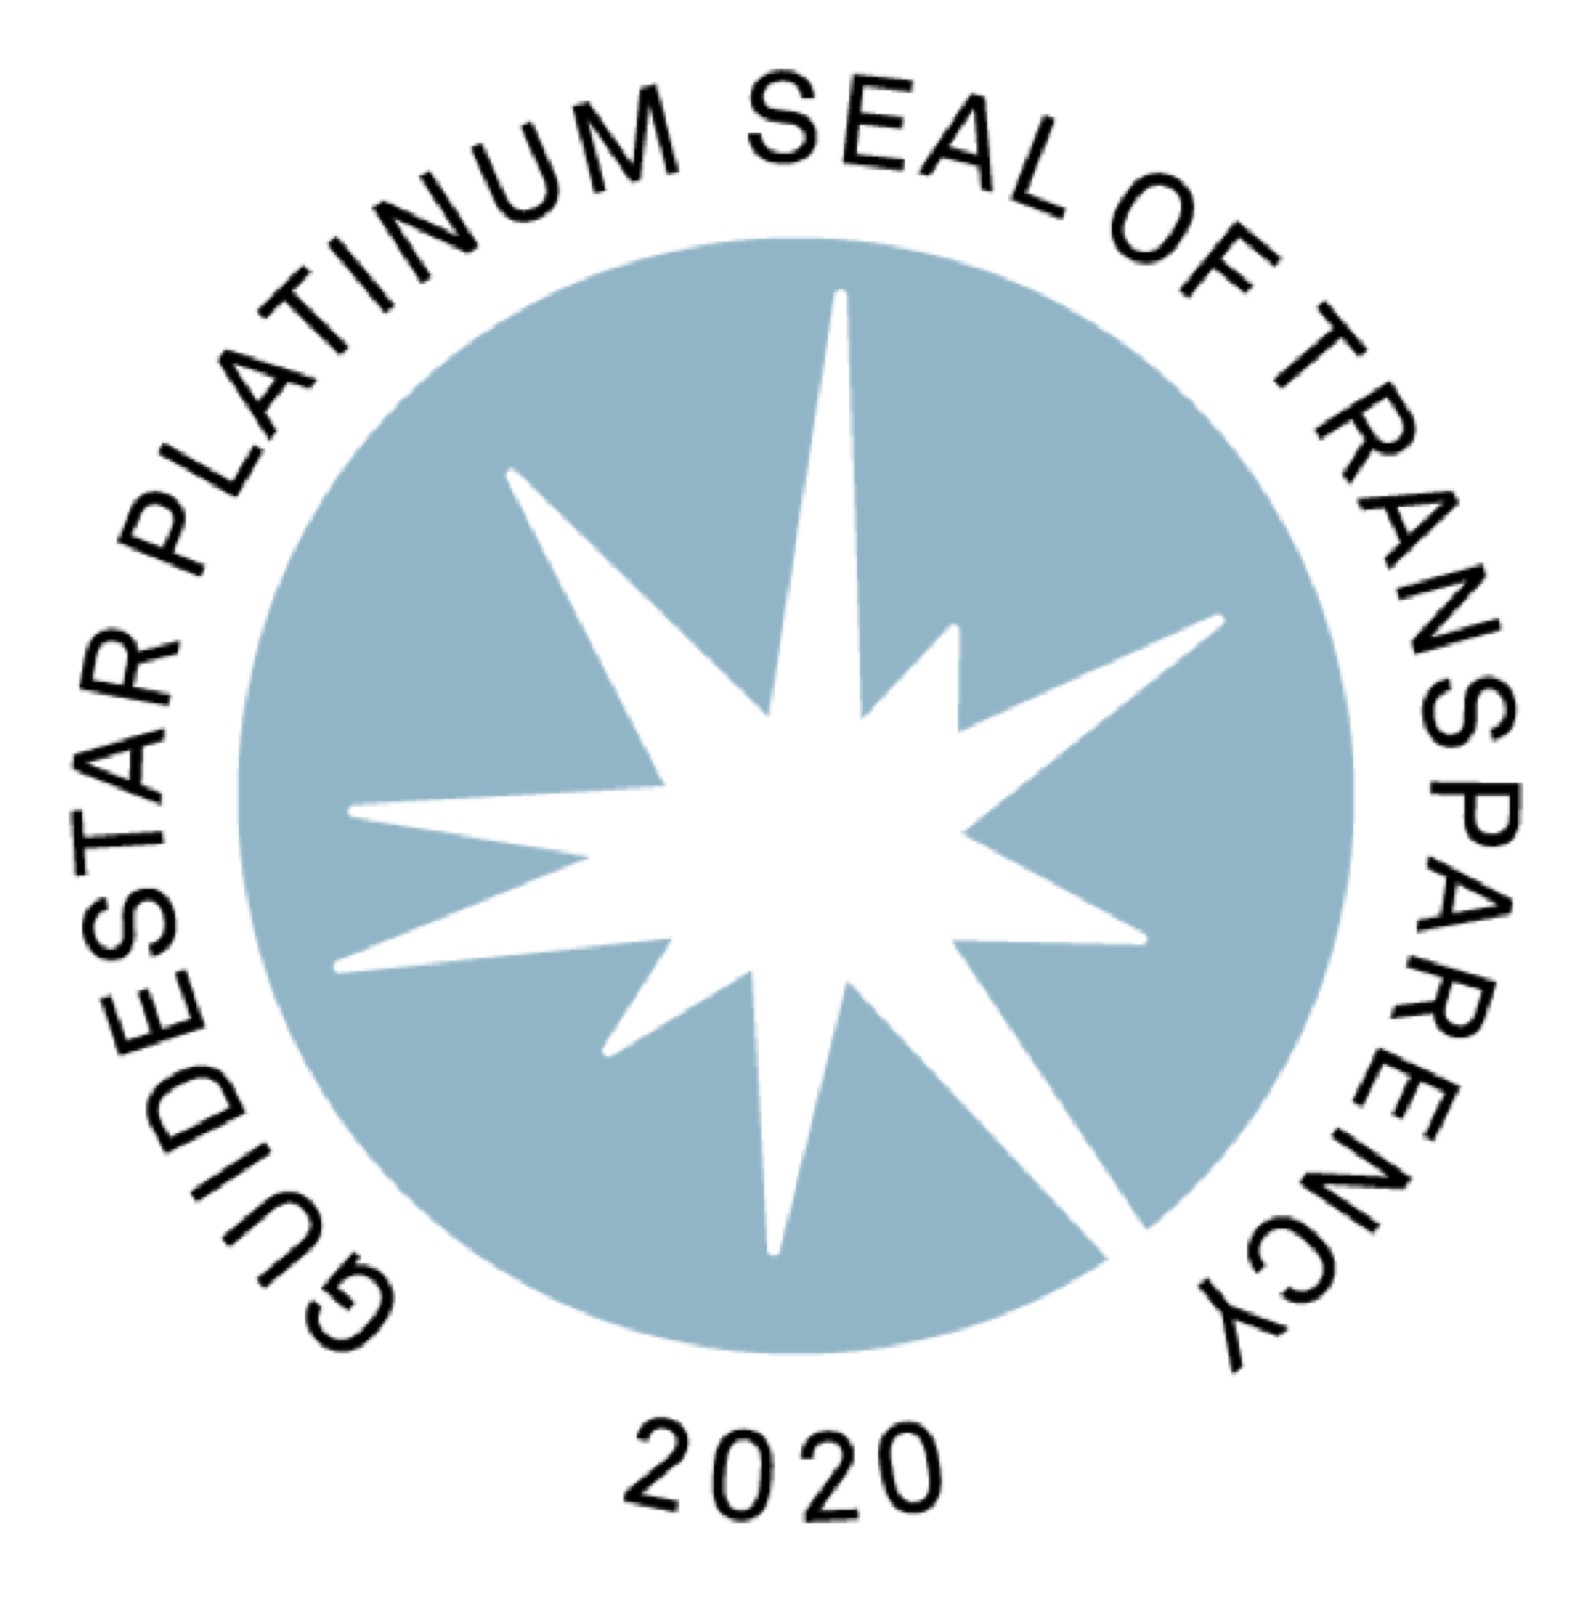 A seal with an amorphous polygon in the center, with the text “Guidestar Platinum Seal of Transparency 2020” surrounding the seal.